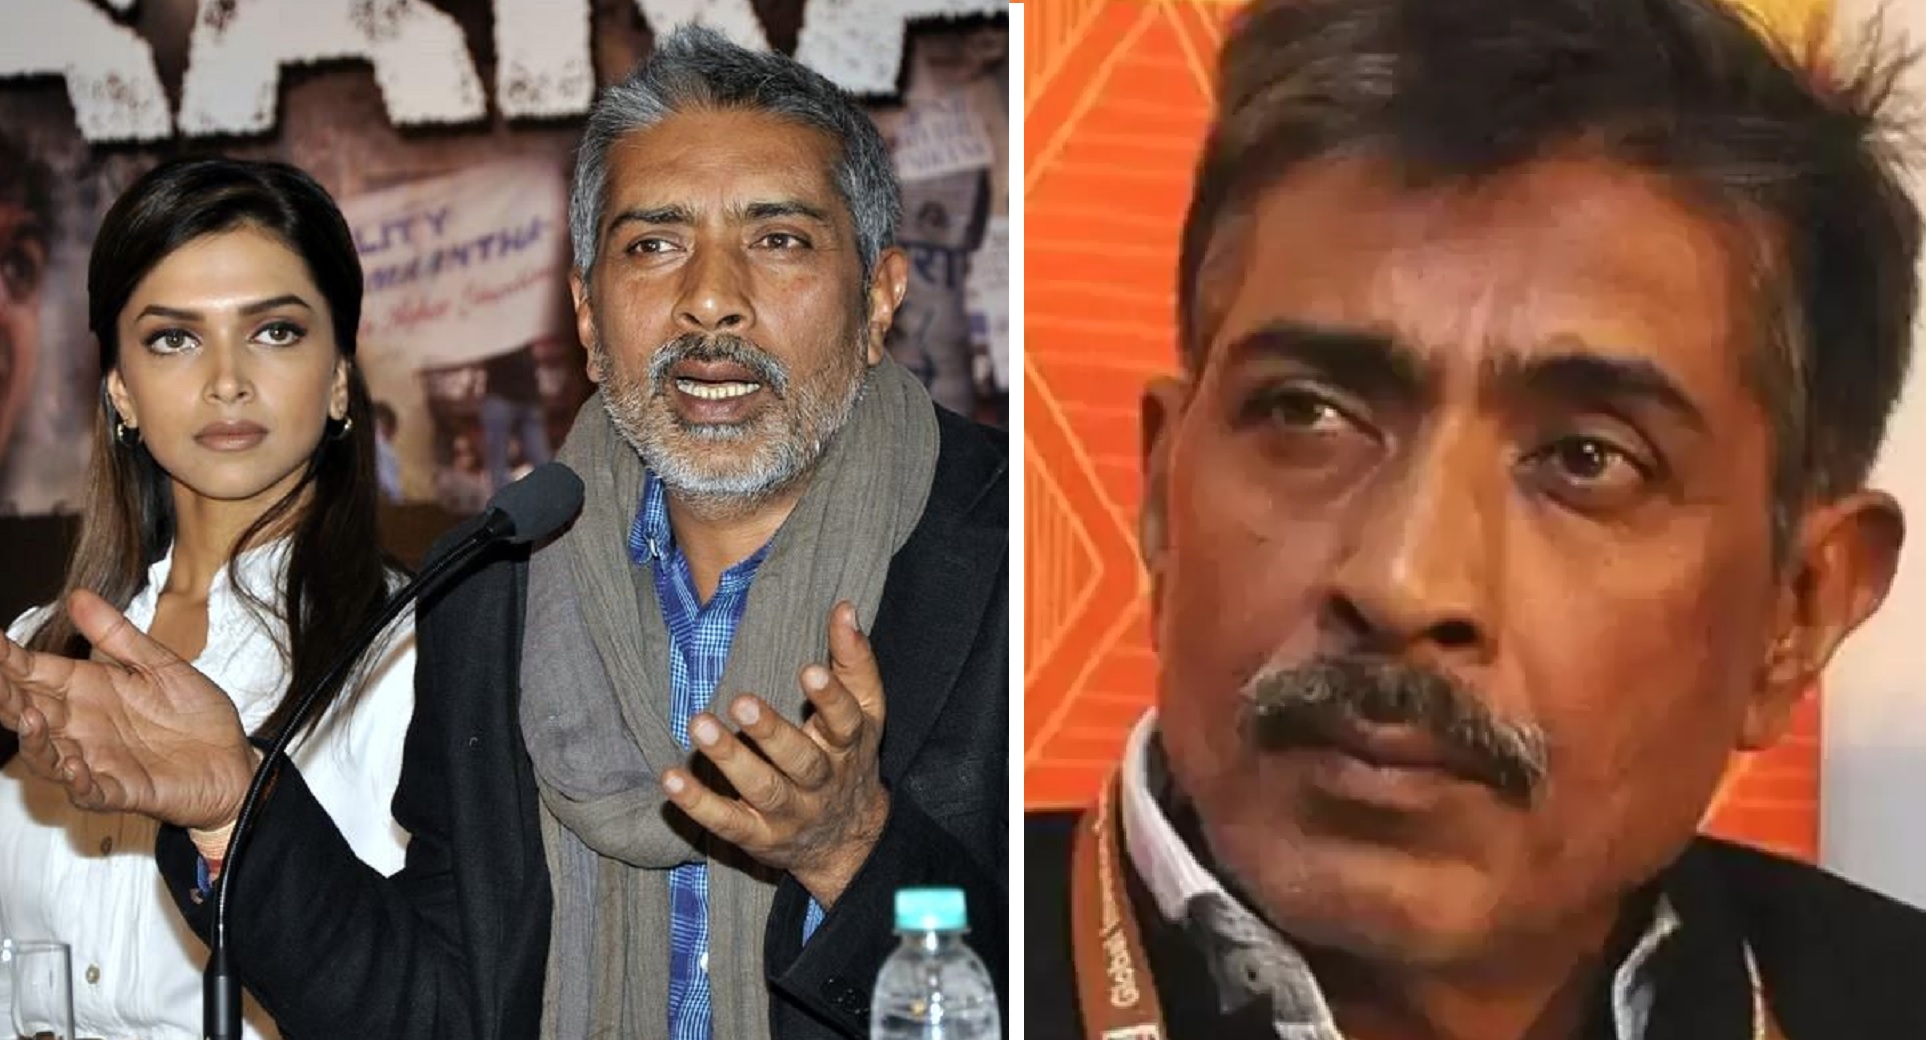 ‘They don’t know what acting is about’: Prakash Jha Slams Bollywood Actors, Says He’s ‘Disgusted’ By Them